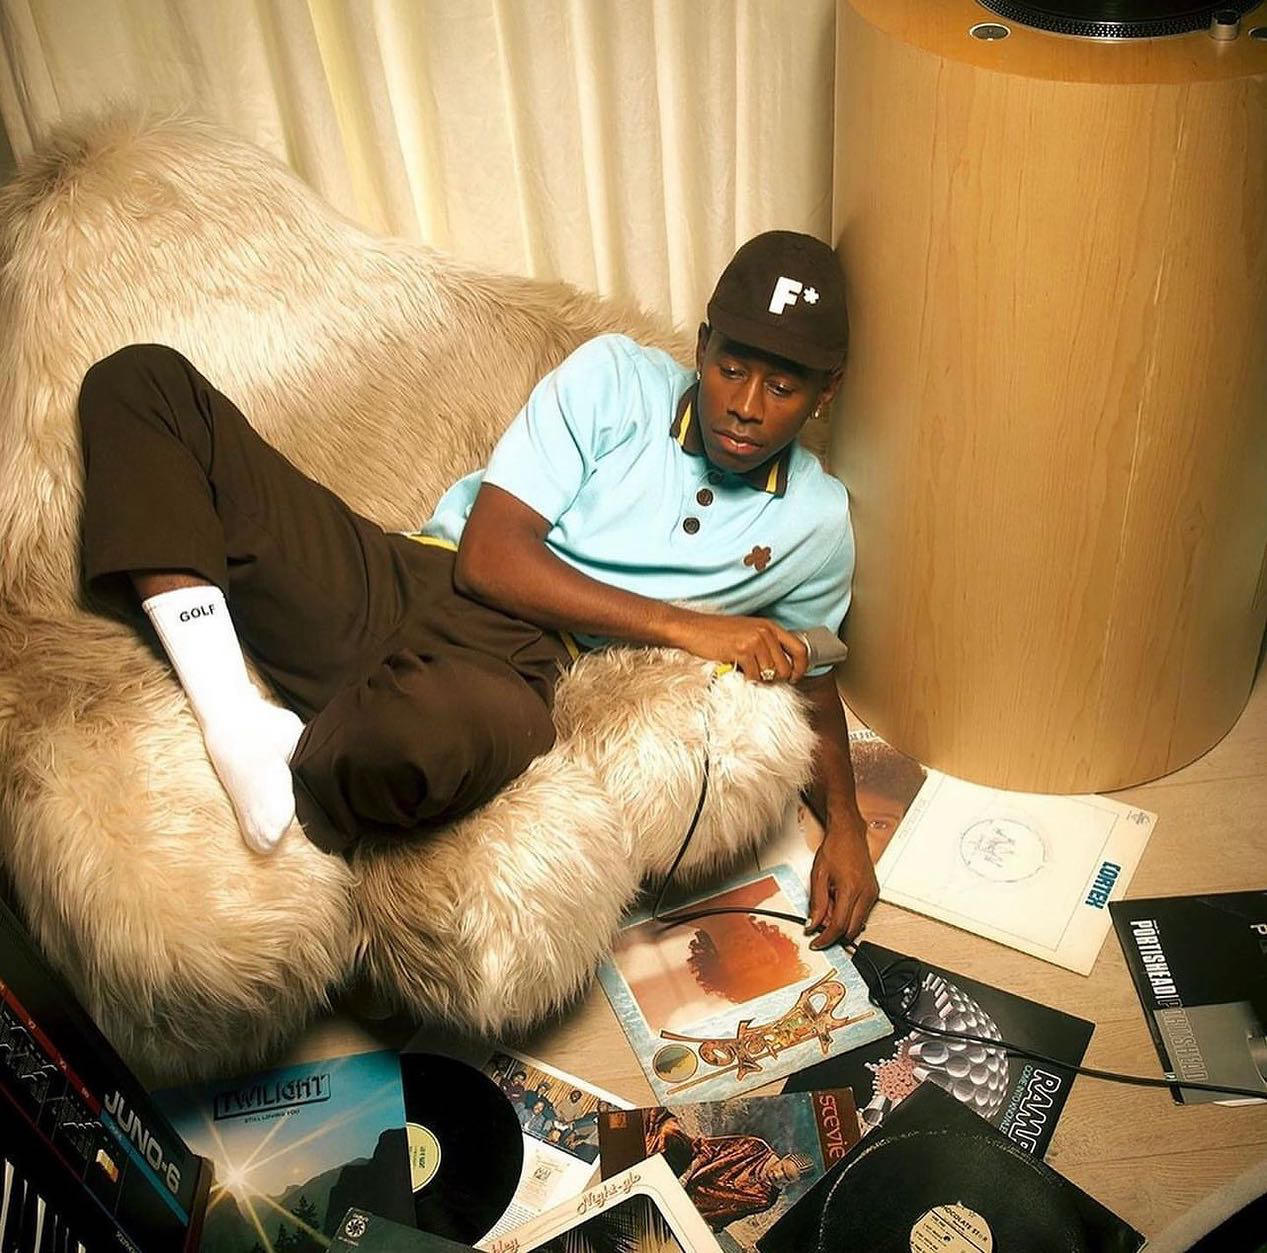 image  1 Somewhere I Would Like To Live - #feliciathegoat lounging on a “yeti” rocking chair by #marioscheinc